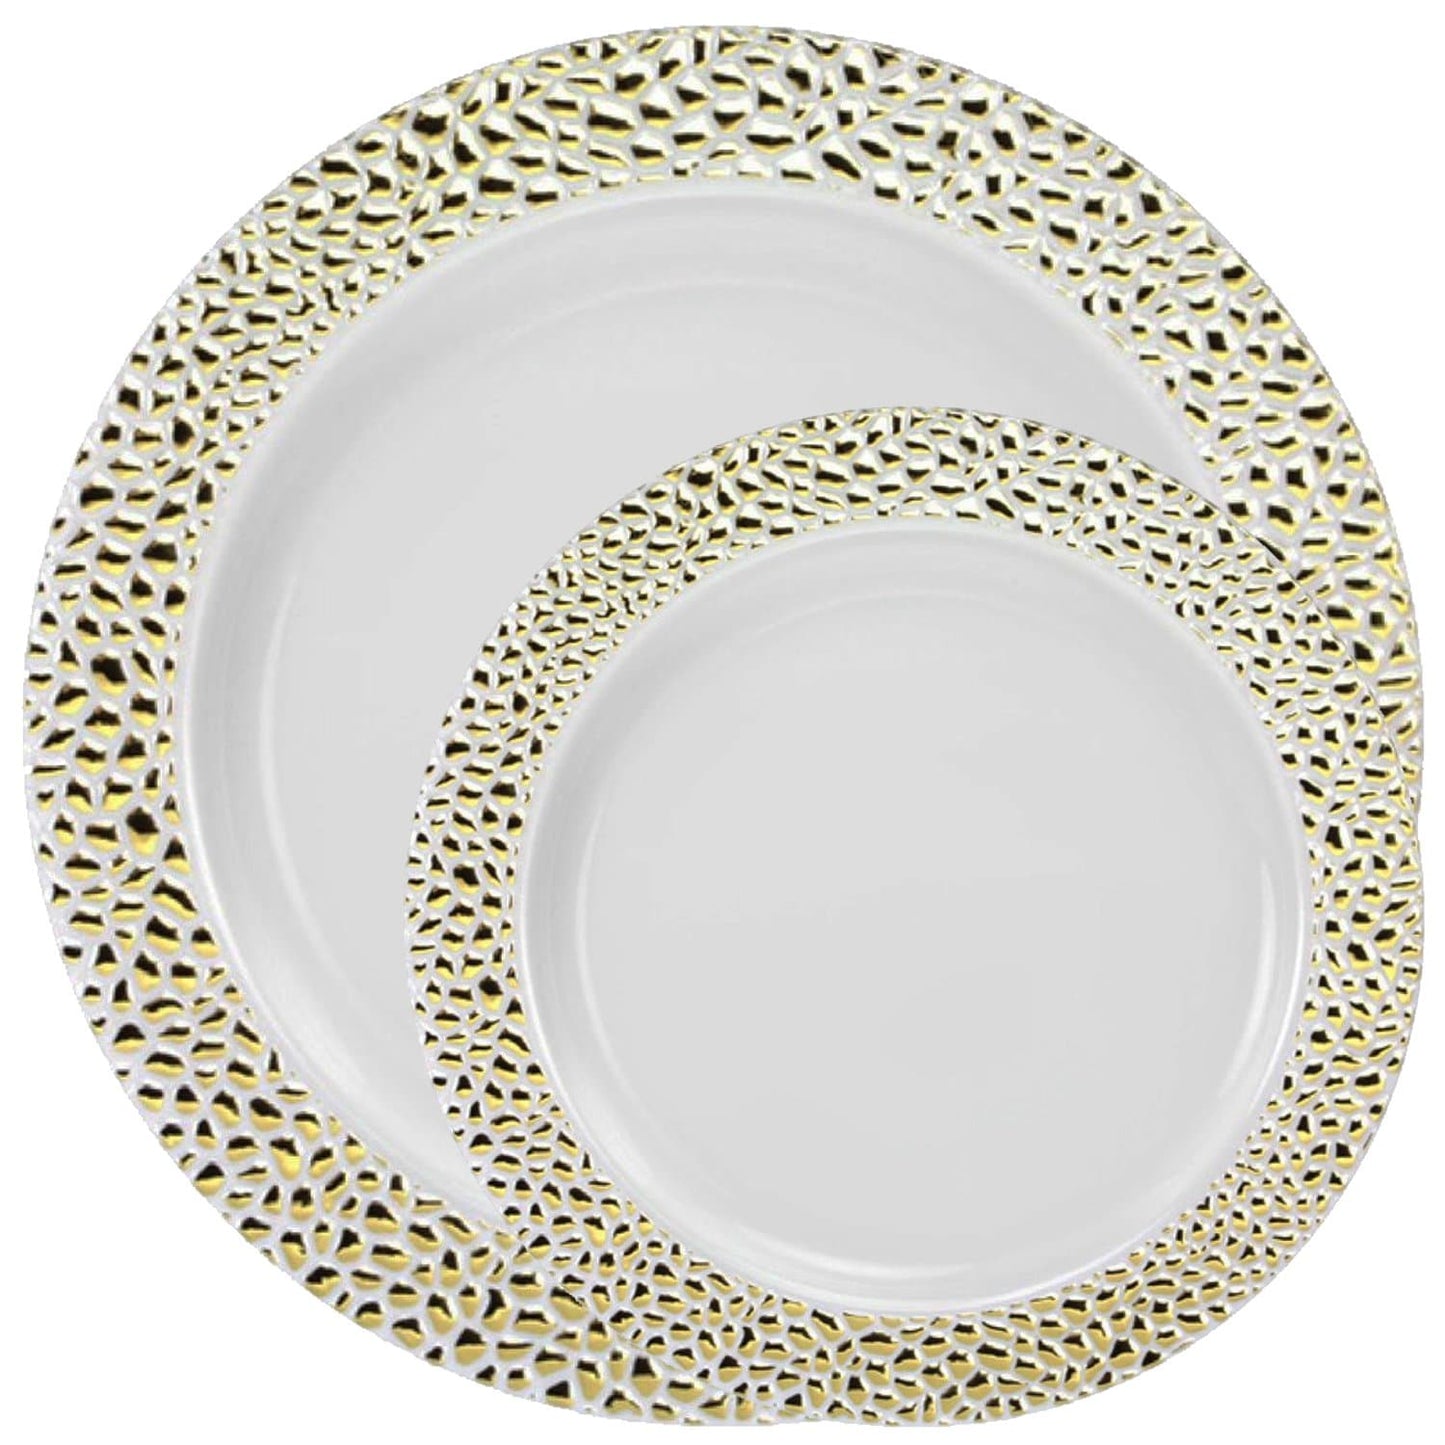 PEBBLED COLLECTIONS GOLD PLASTIC TABLEWARE PACKAGE Plates Lillian Tablesettings   